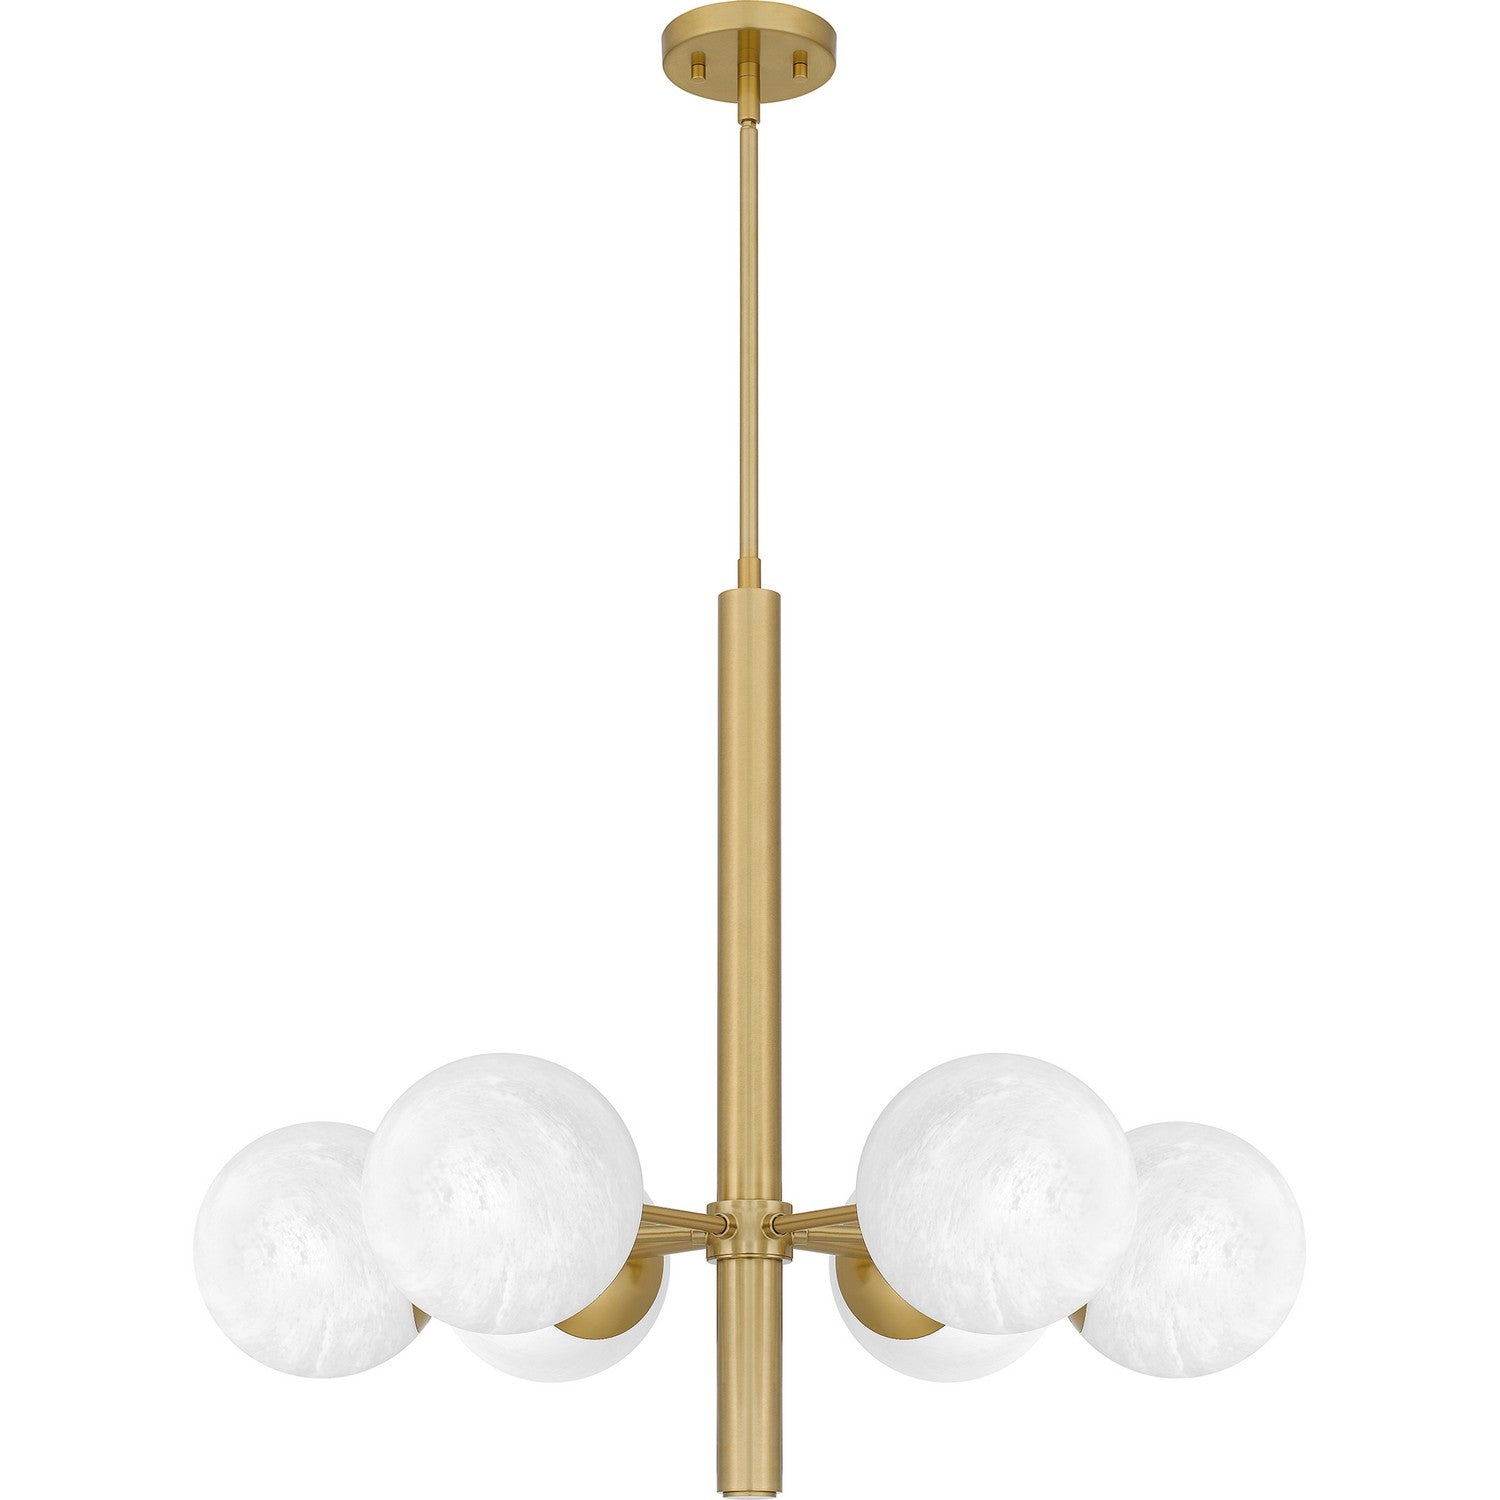 Solei Six Light Chandelier by Quoizel in Aged Brass Finish (PCSEI5028AB)